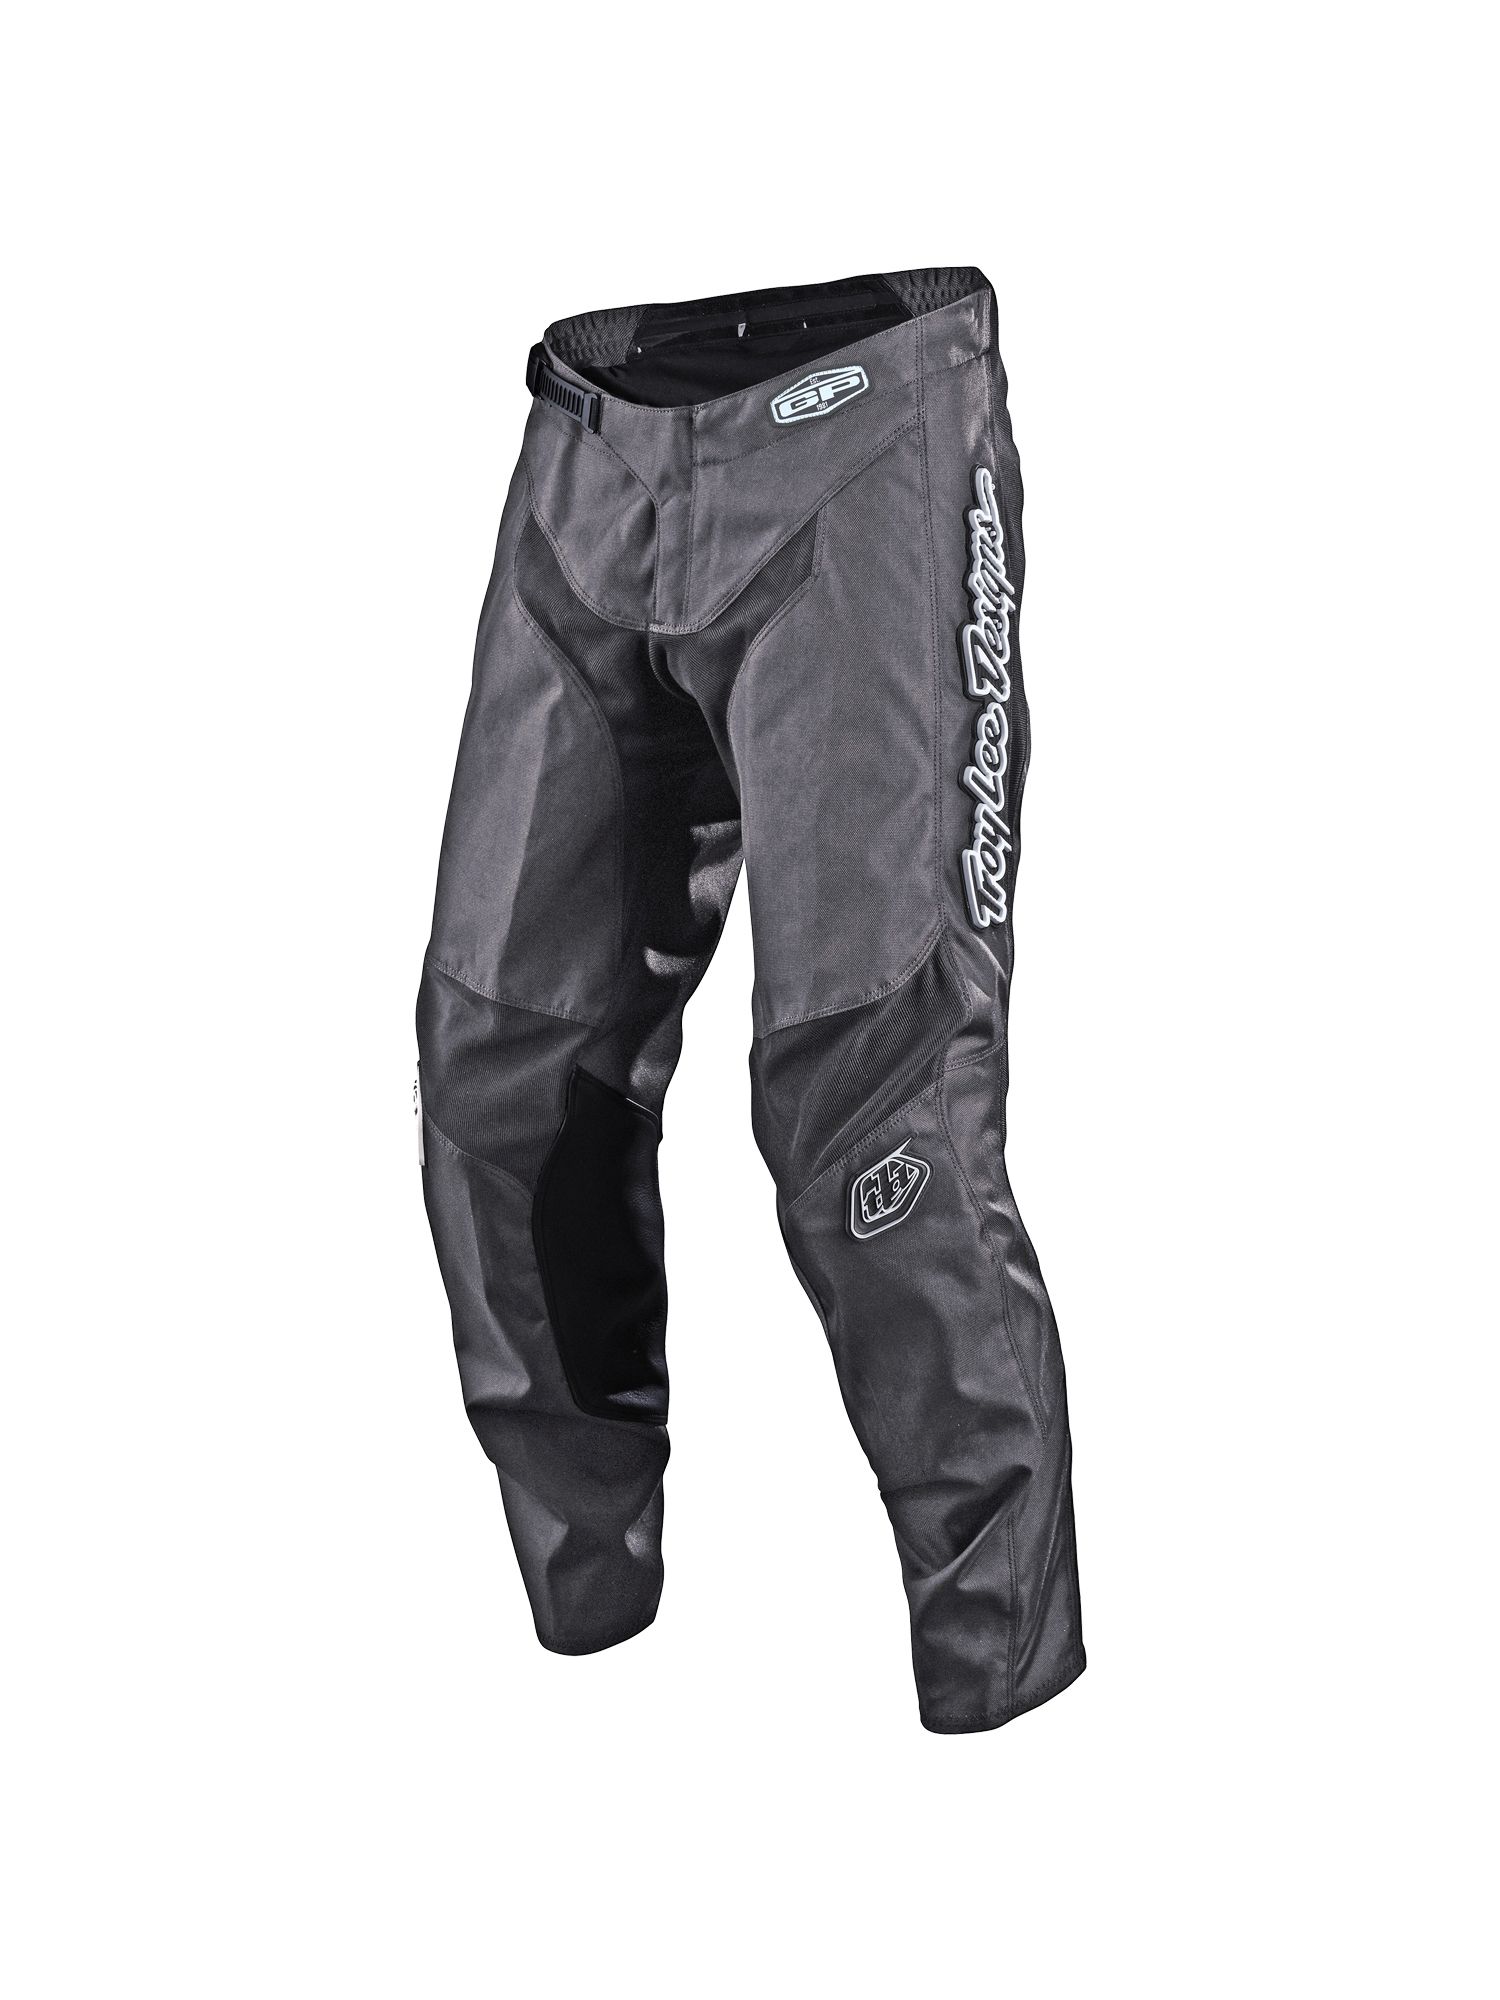 TDY215｜YOUTH GP PANTS［2colors］